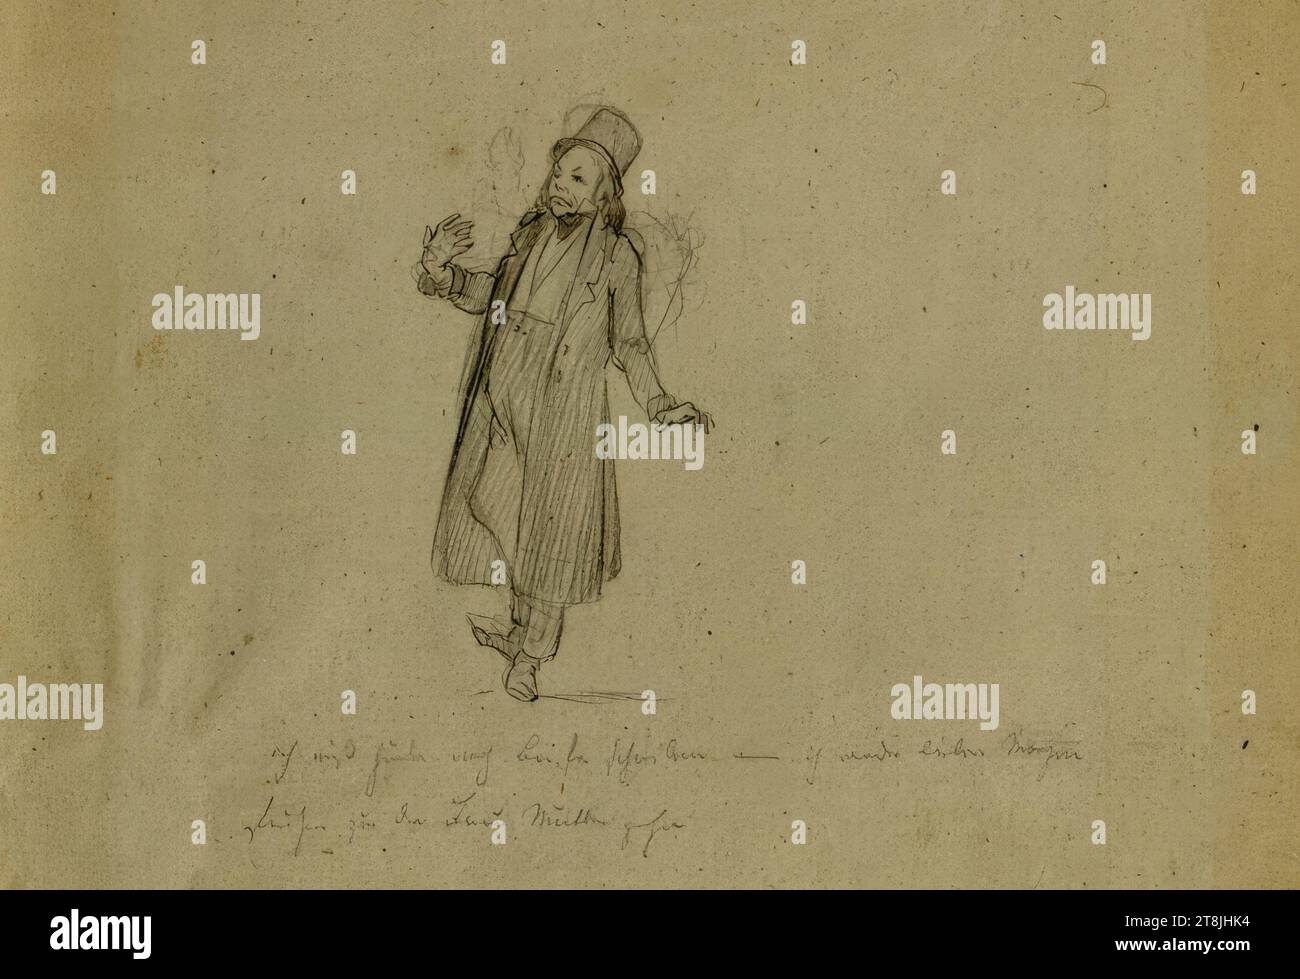 Depiction of a man with strong gestures, with a coat and top hat, sketchbook Danhauser Josef; 26 parts, Josef Danhauser, Vienna 1805 - 1845 Vienna, drawing, pencil, watercolored; Inscription: colored pencil, pencil, 17.1 x 20.9 cm, right. 'Nachlaß Danhauser', estate stamp, verso: right Seal mark, because I'd rather go to my mother tomorrow / straight away'; verso: l.u. 'I still have to write letters today / N 3 Danhauser'; r.u. '423, Austria Stock Photo